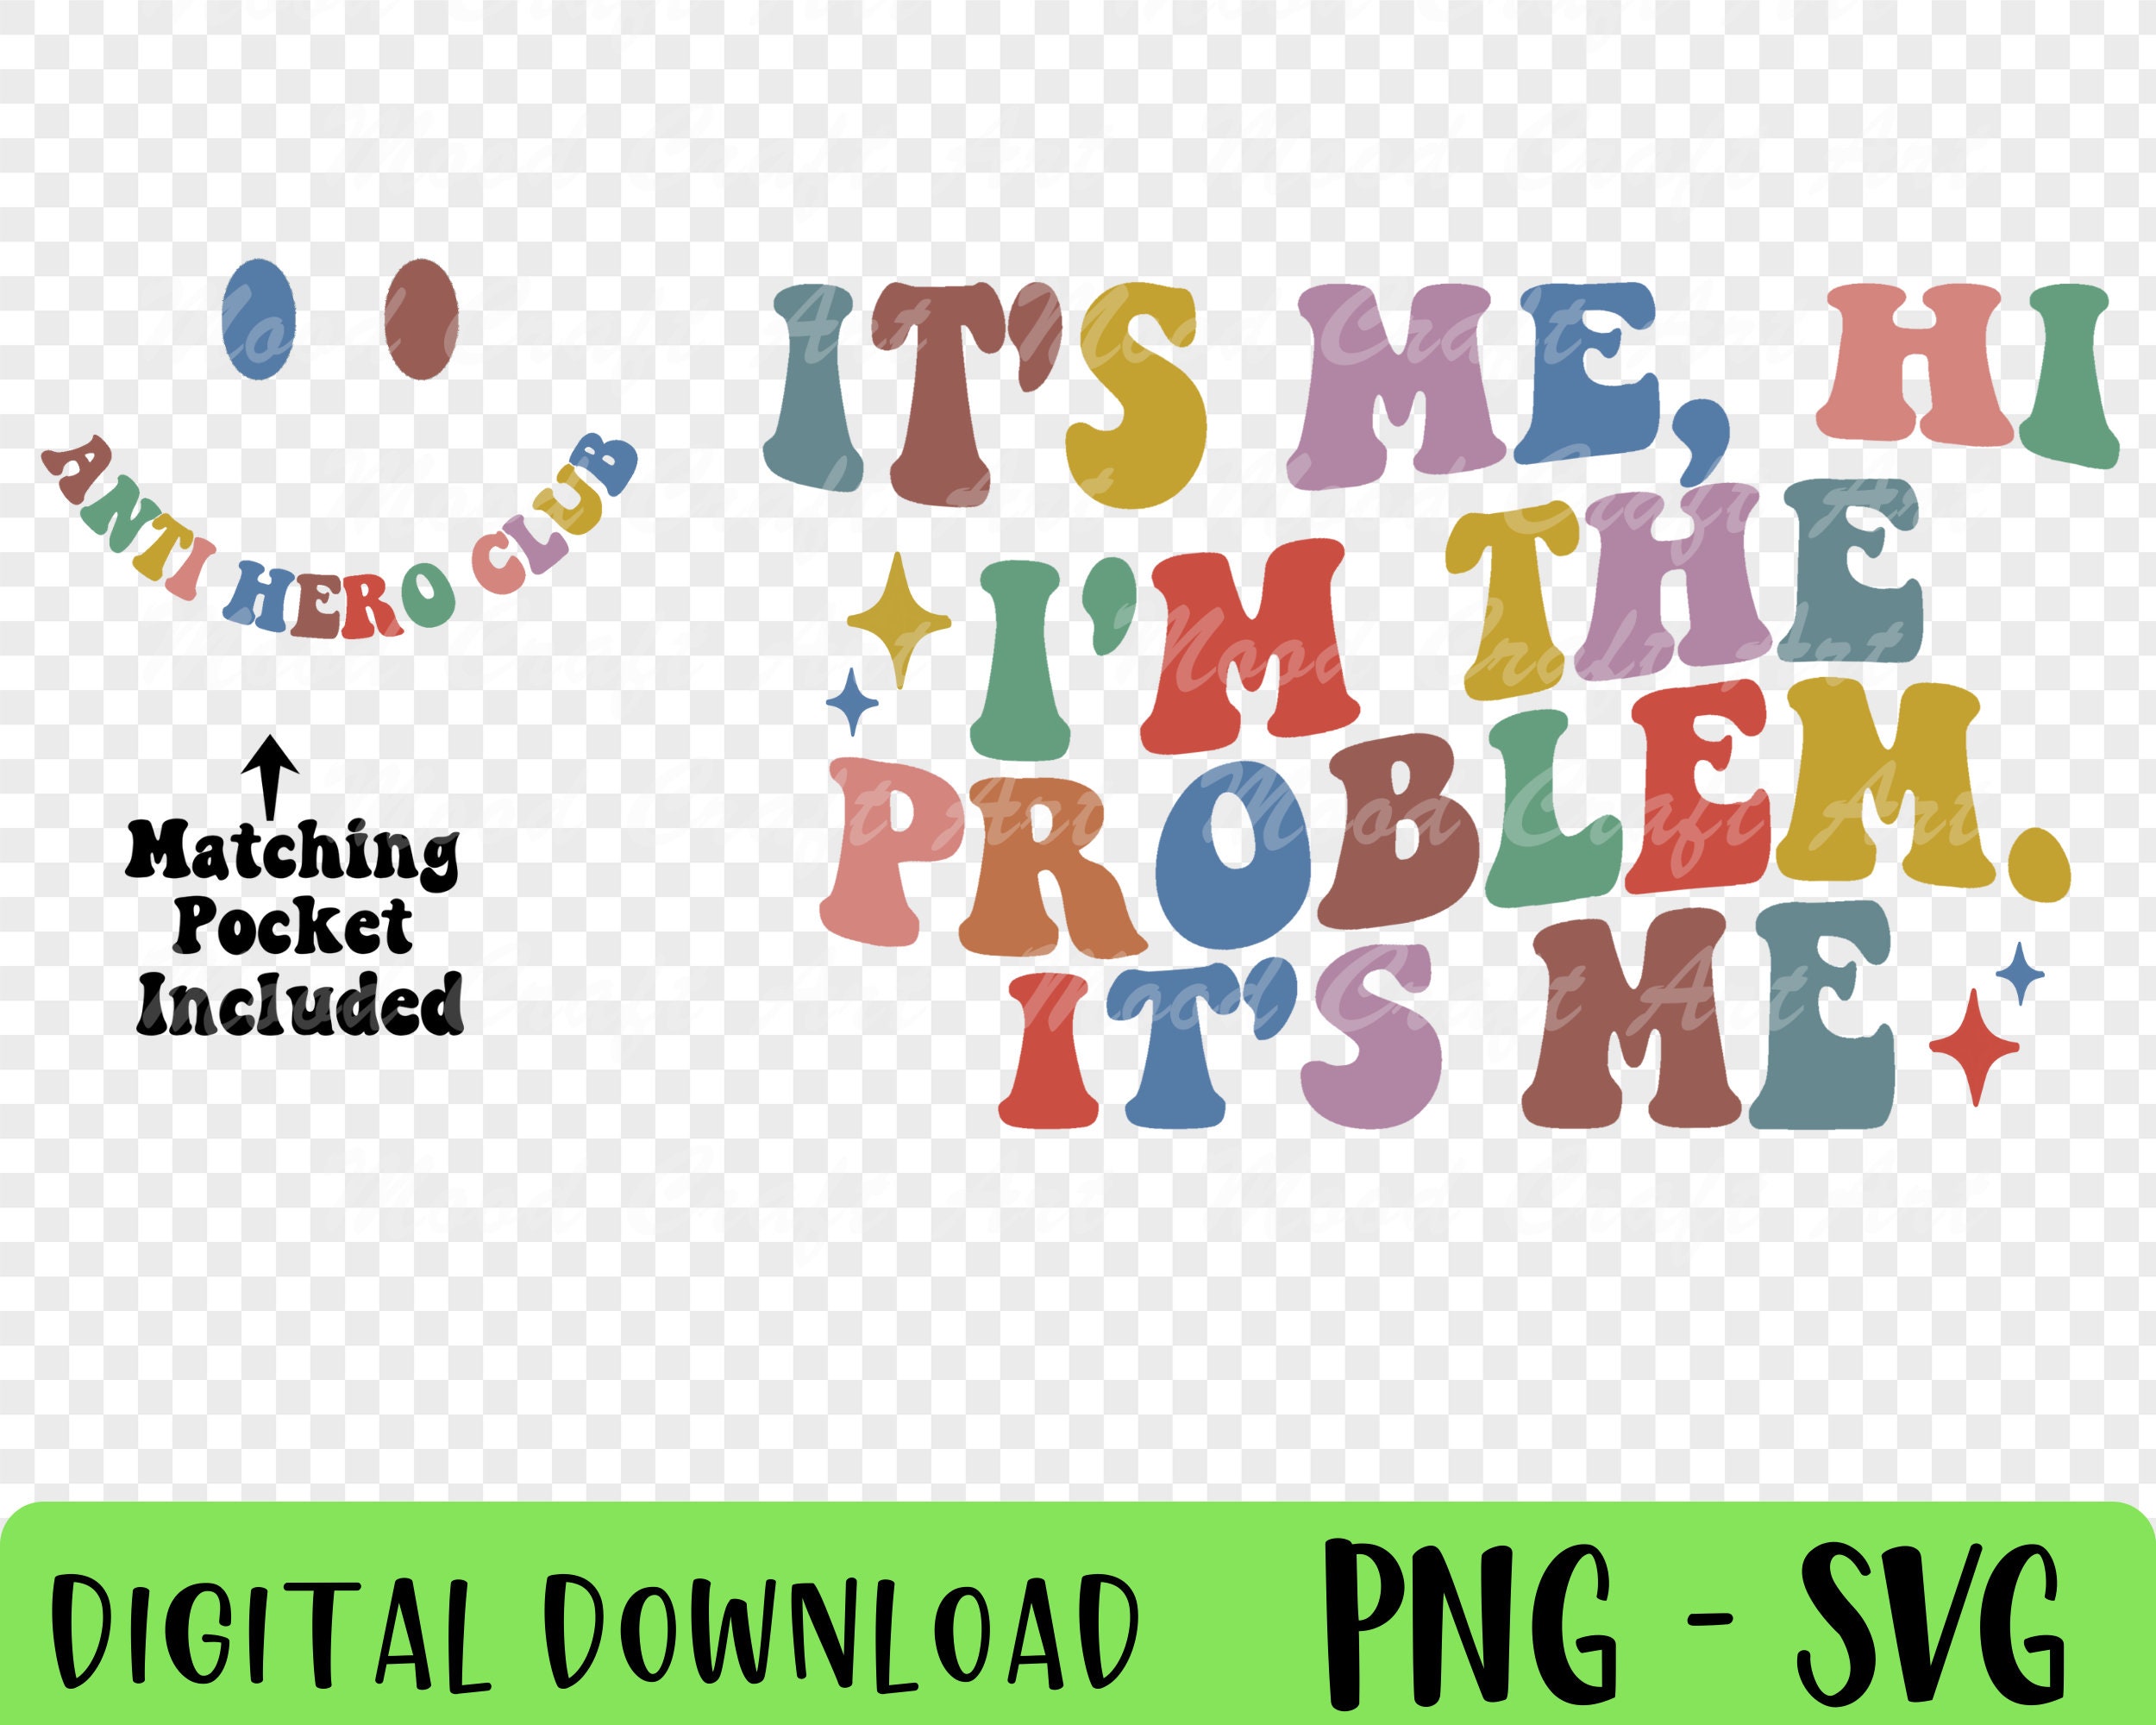 It'Me. Hi I'm the Problem It's Me Svg Graphic by Smart Crafter